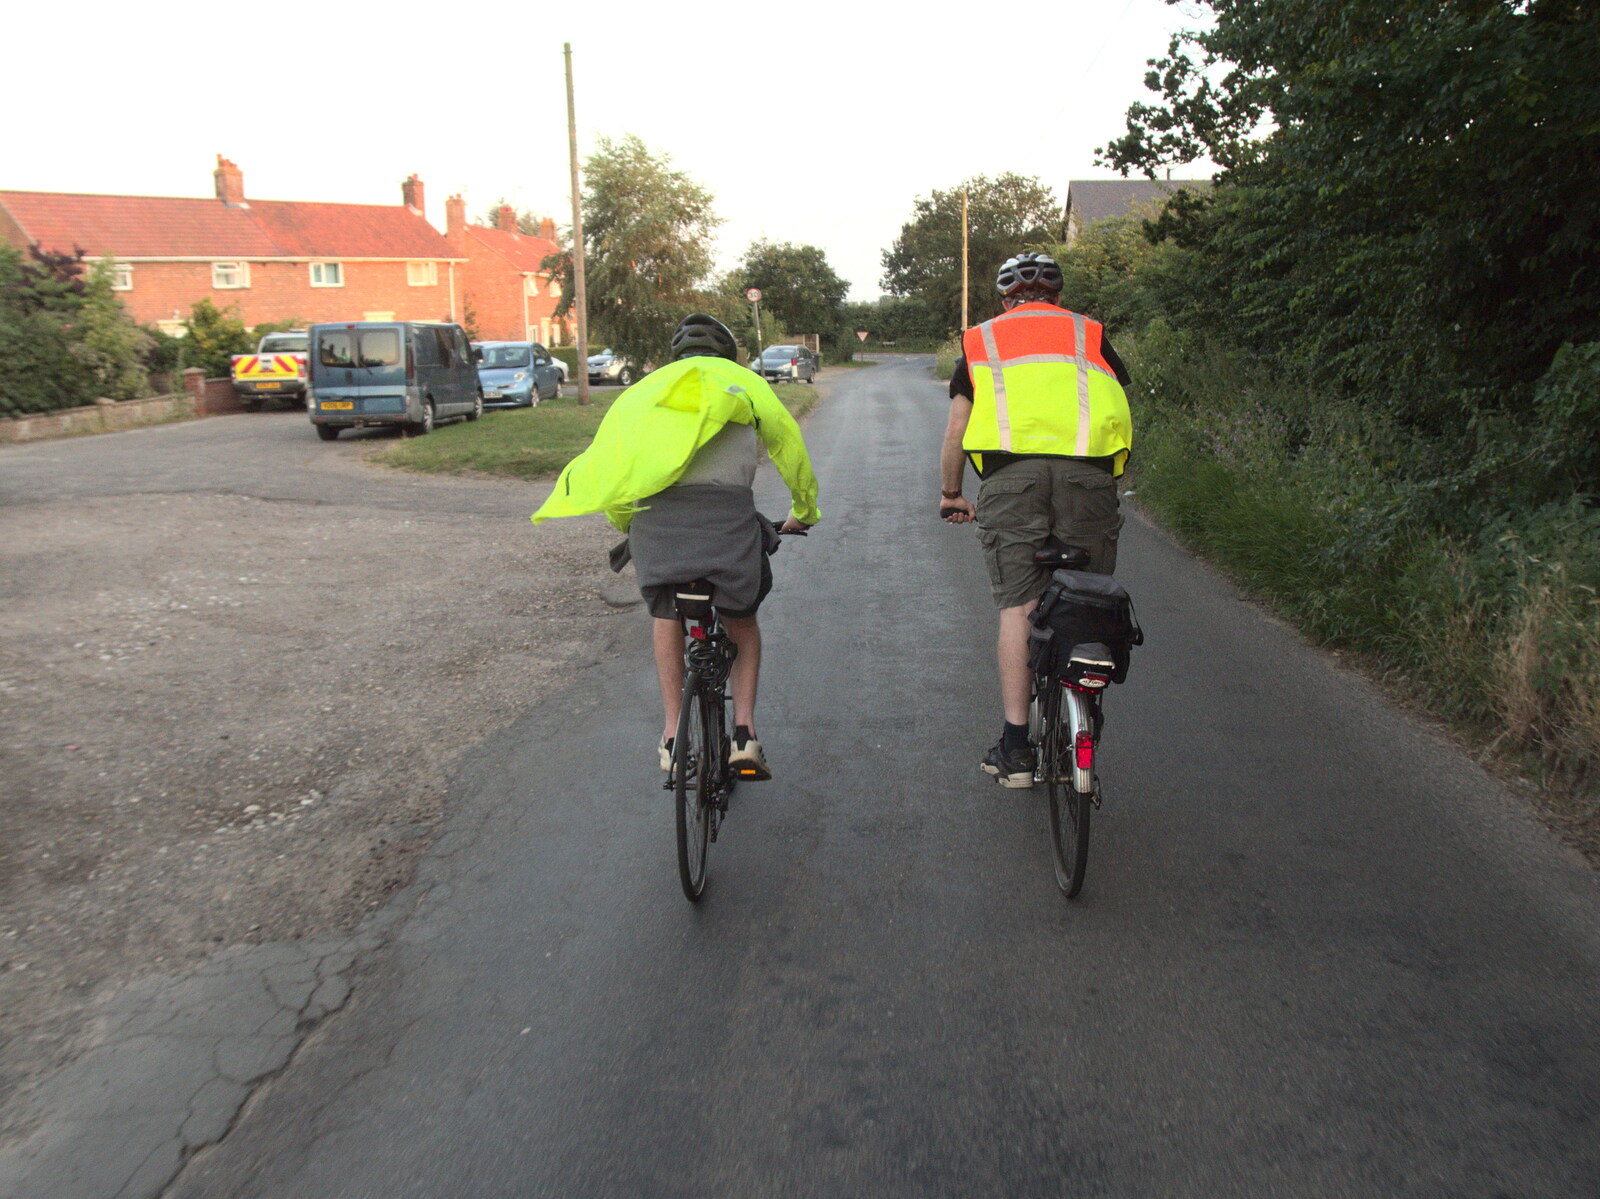 Cycling through Burston from The BSCC at The Crown, Gissing, Norfolk - 22nd July 2021